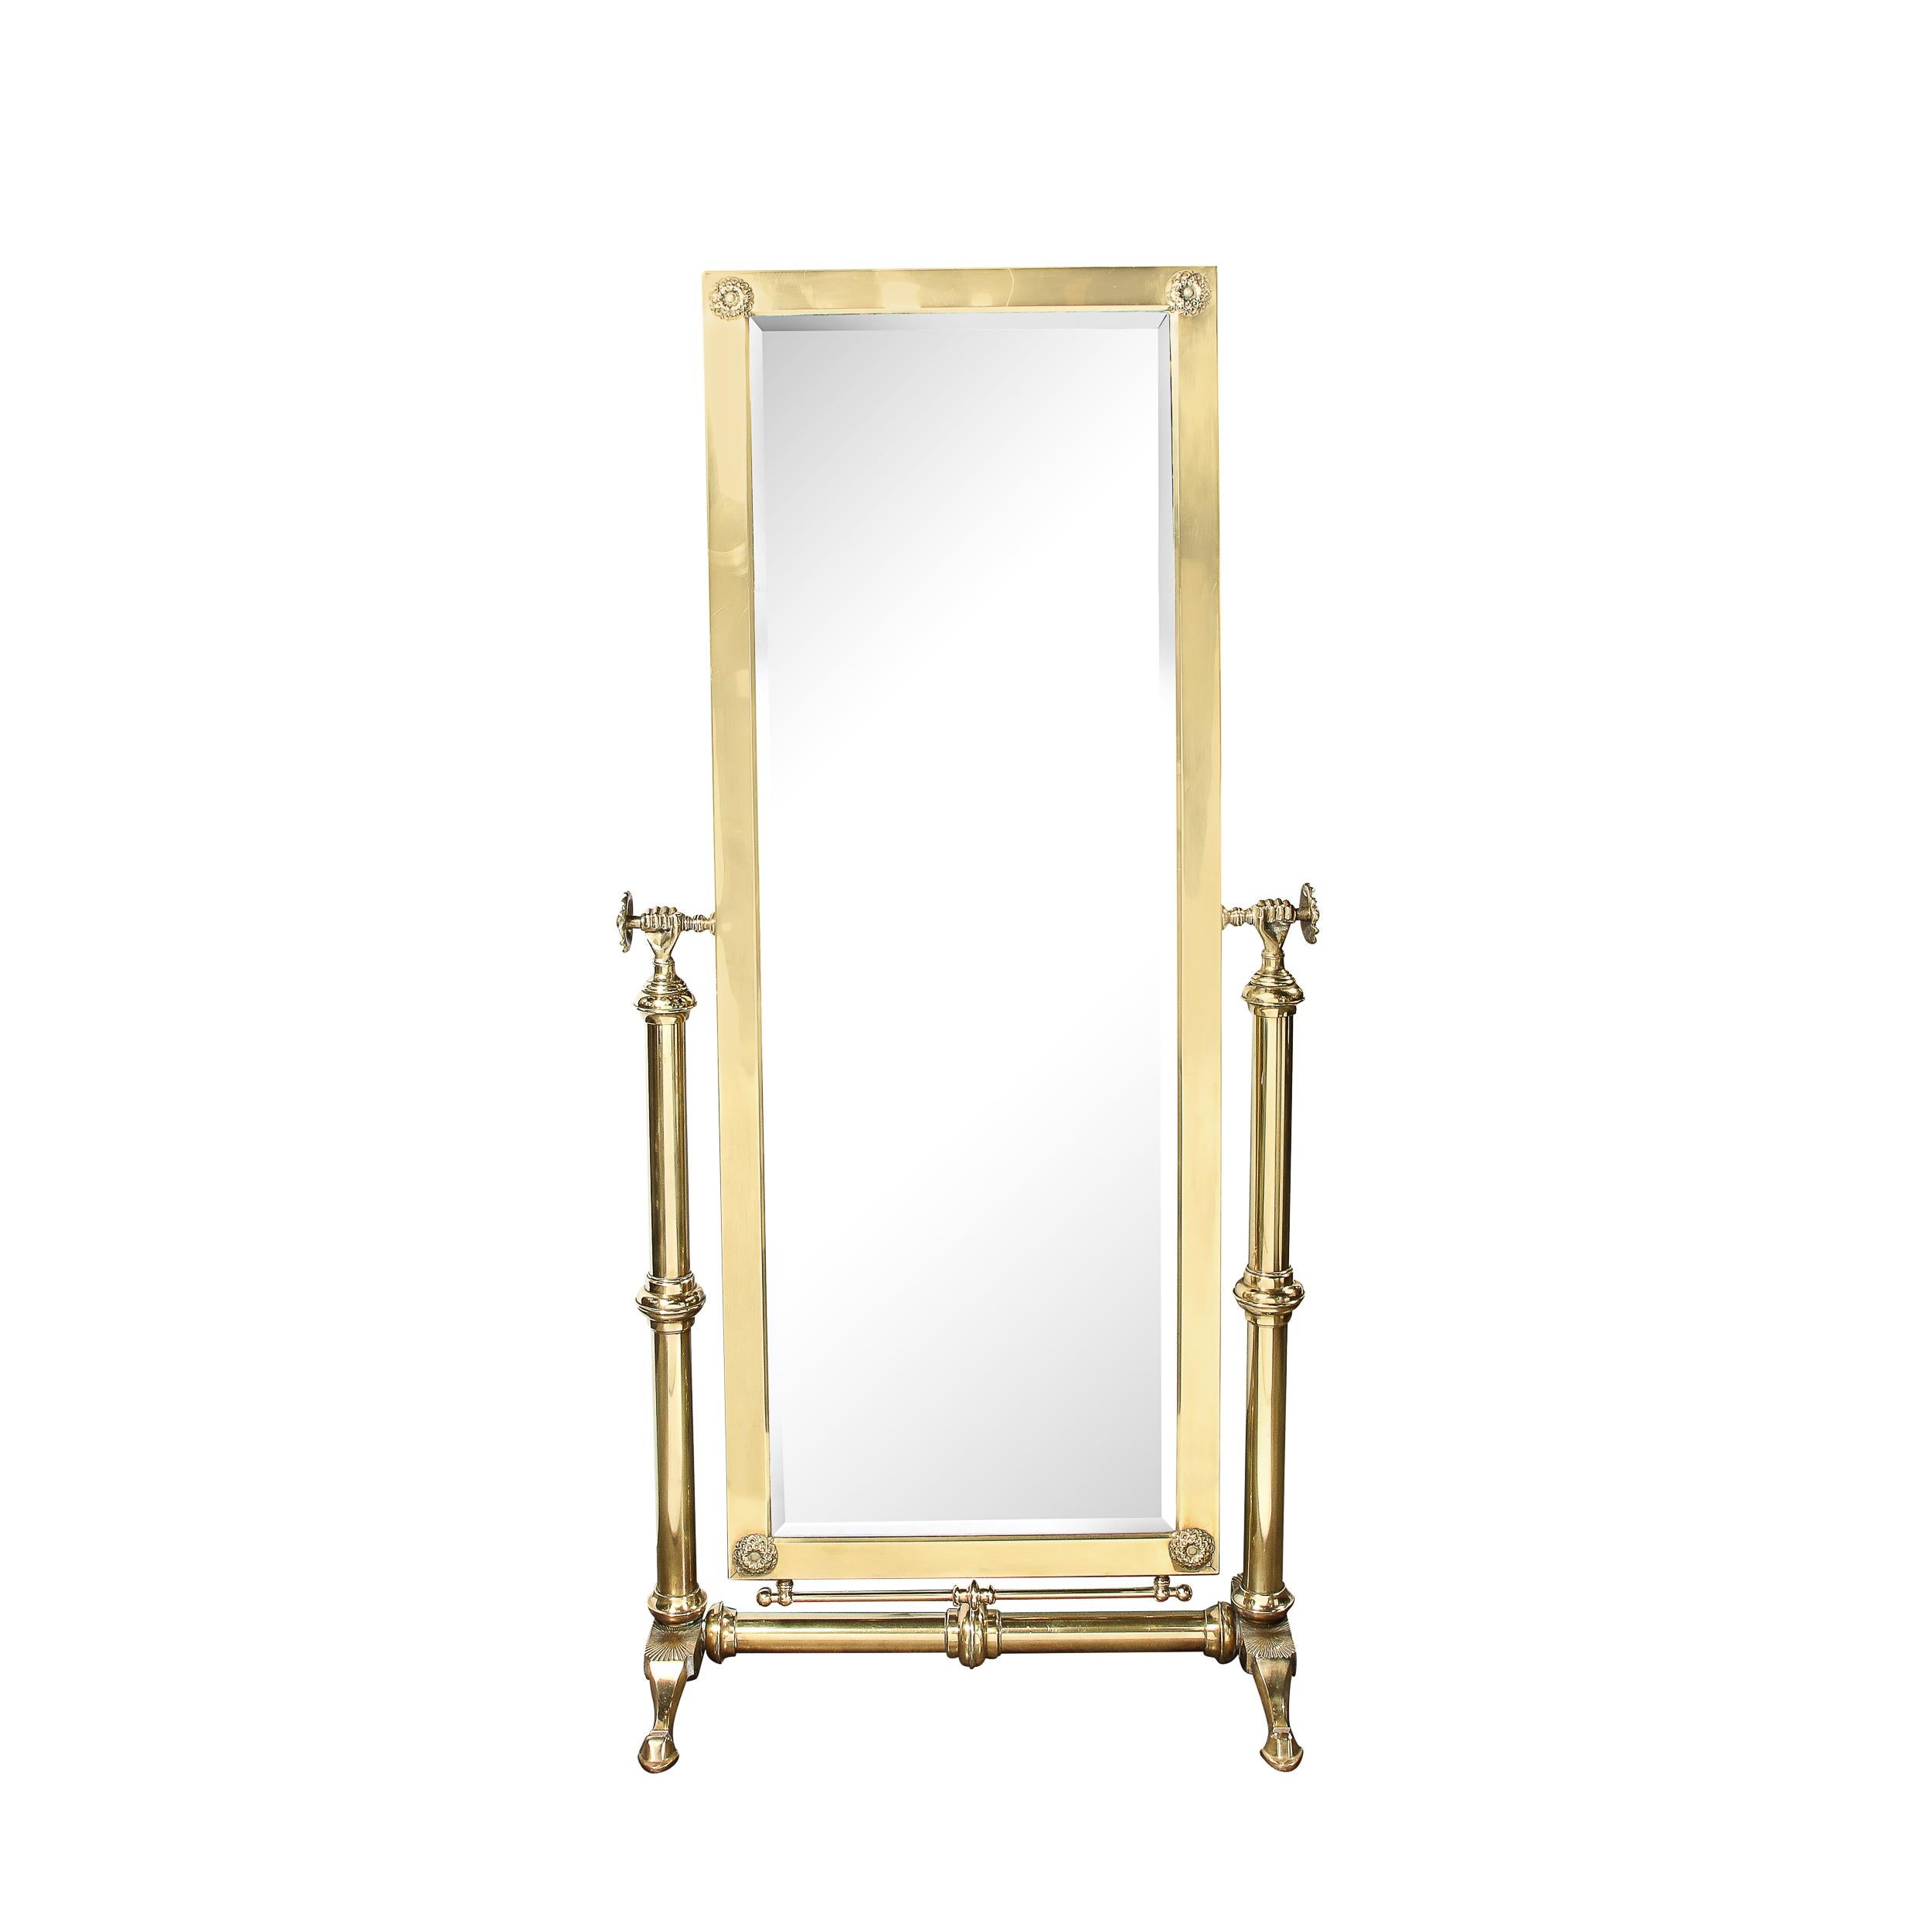 This bold and well adorned Mid-Century Modernist Articulating Cheval Mirror in Brass originates from the United States, Circa 1960. Featuring a vertical rectilinear profile in solid brass, this piece is supported by a highly stylized base drawing on